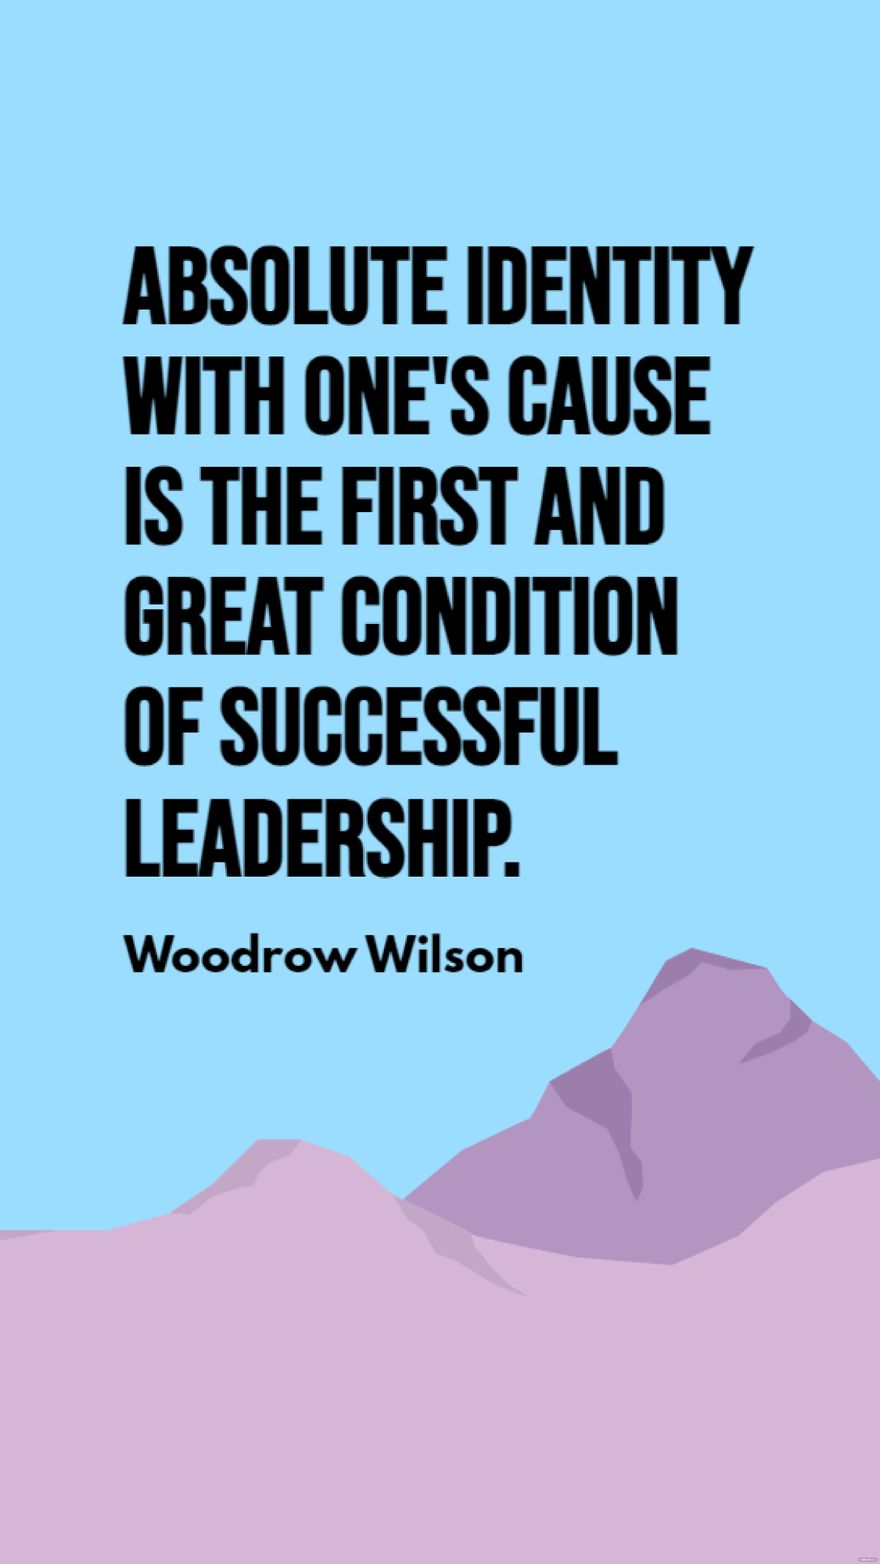 Woodrow Wilson - Absolute identity with one's cause is the first and great condition of successful leadership. in JPG